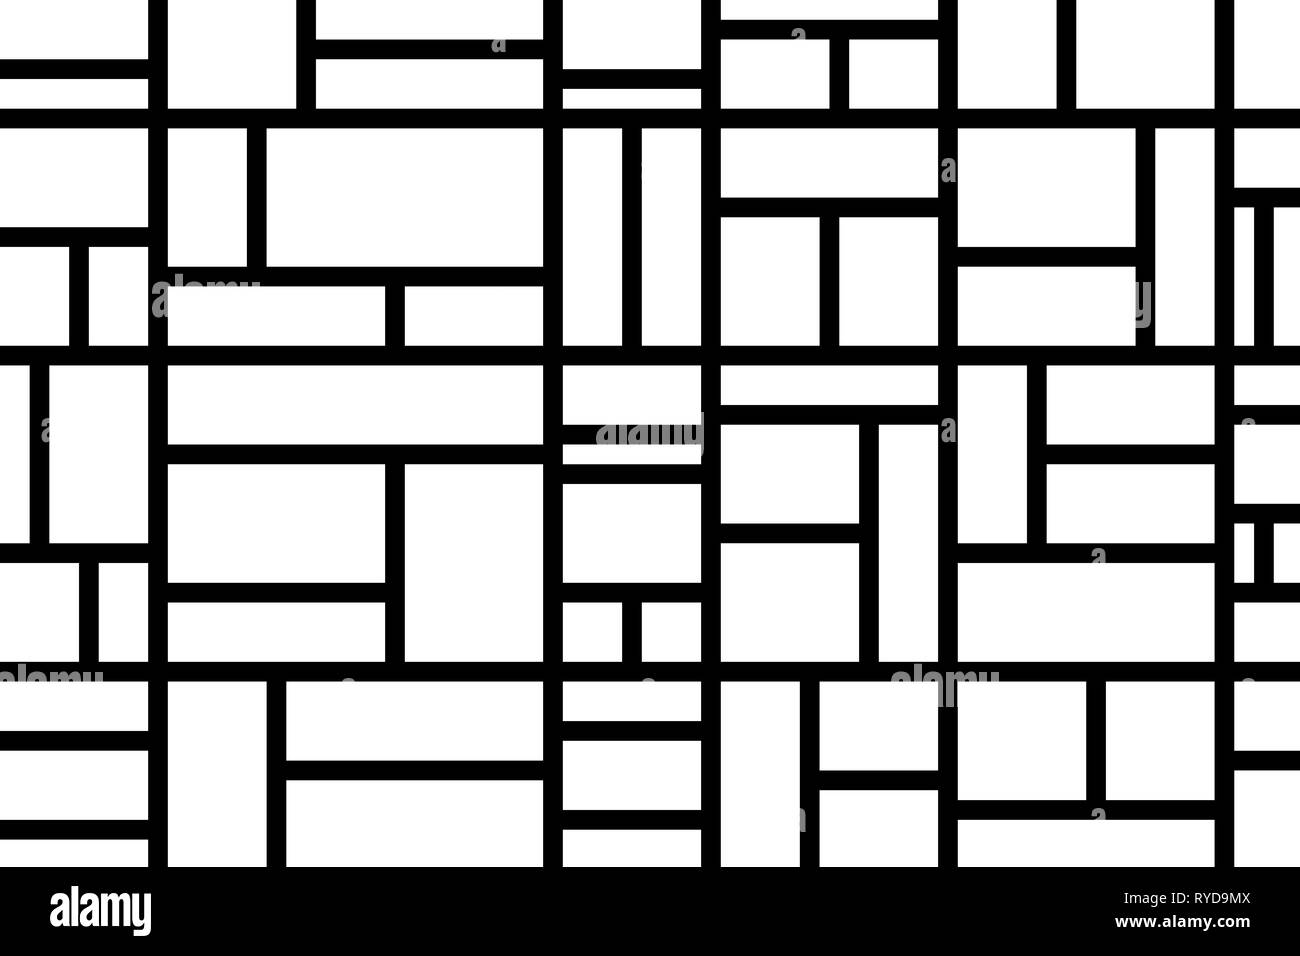 Abstract mosaic pattern grid black and white - illustration Stock Photo